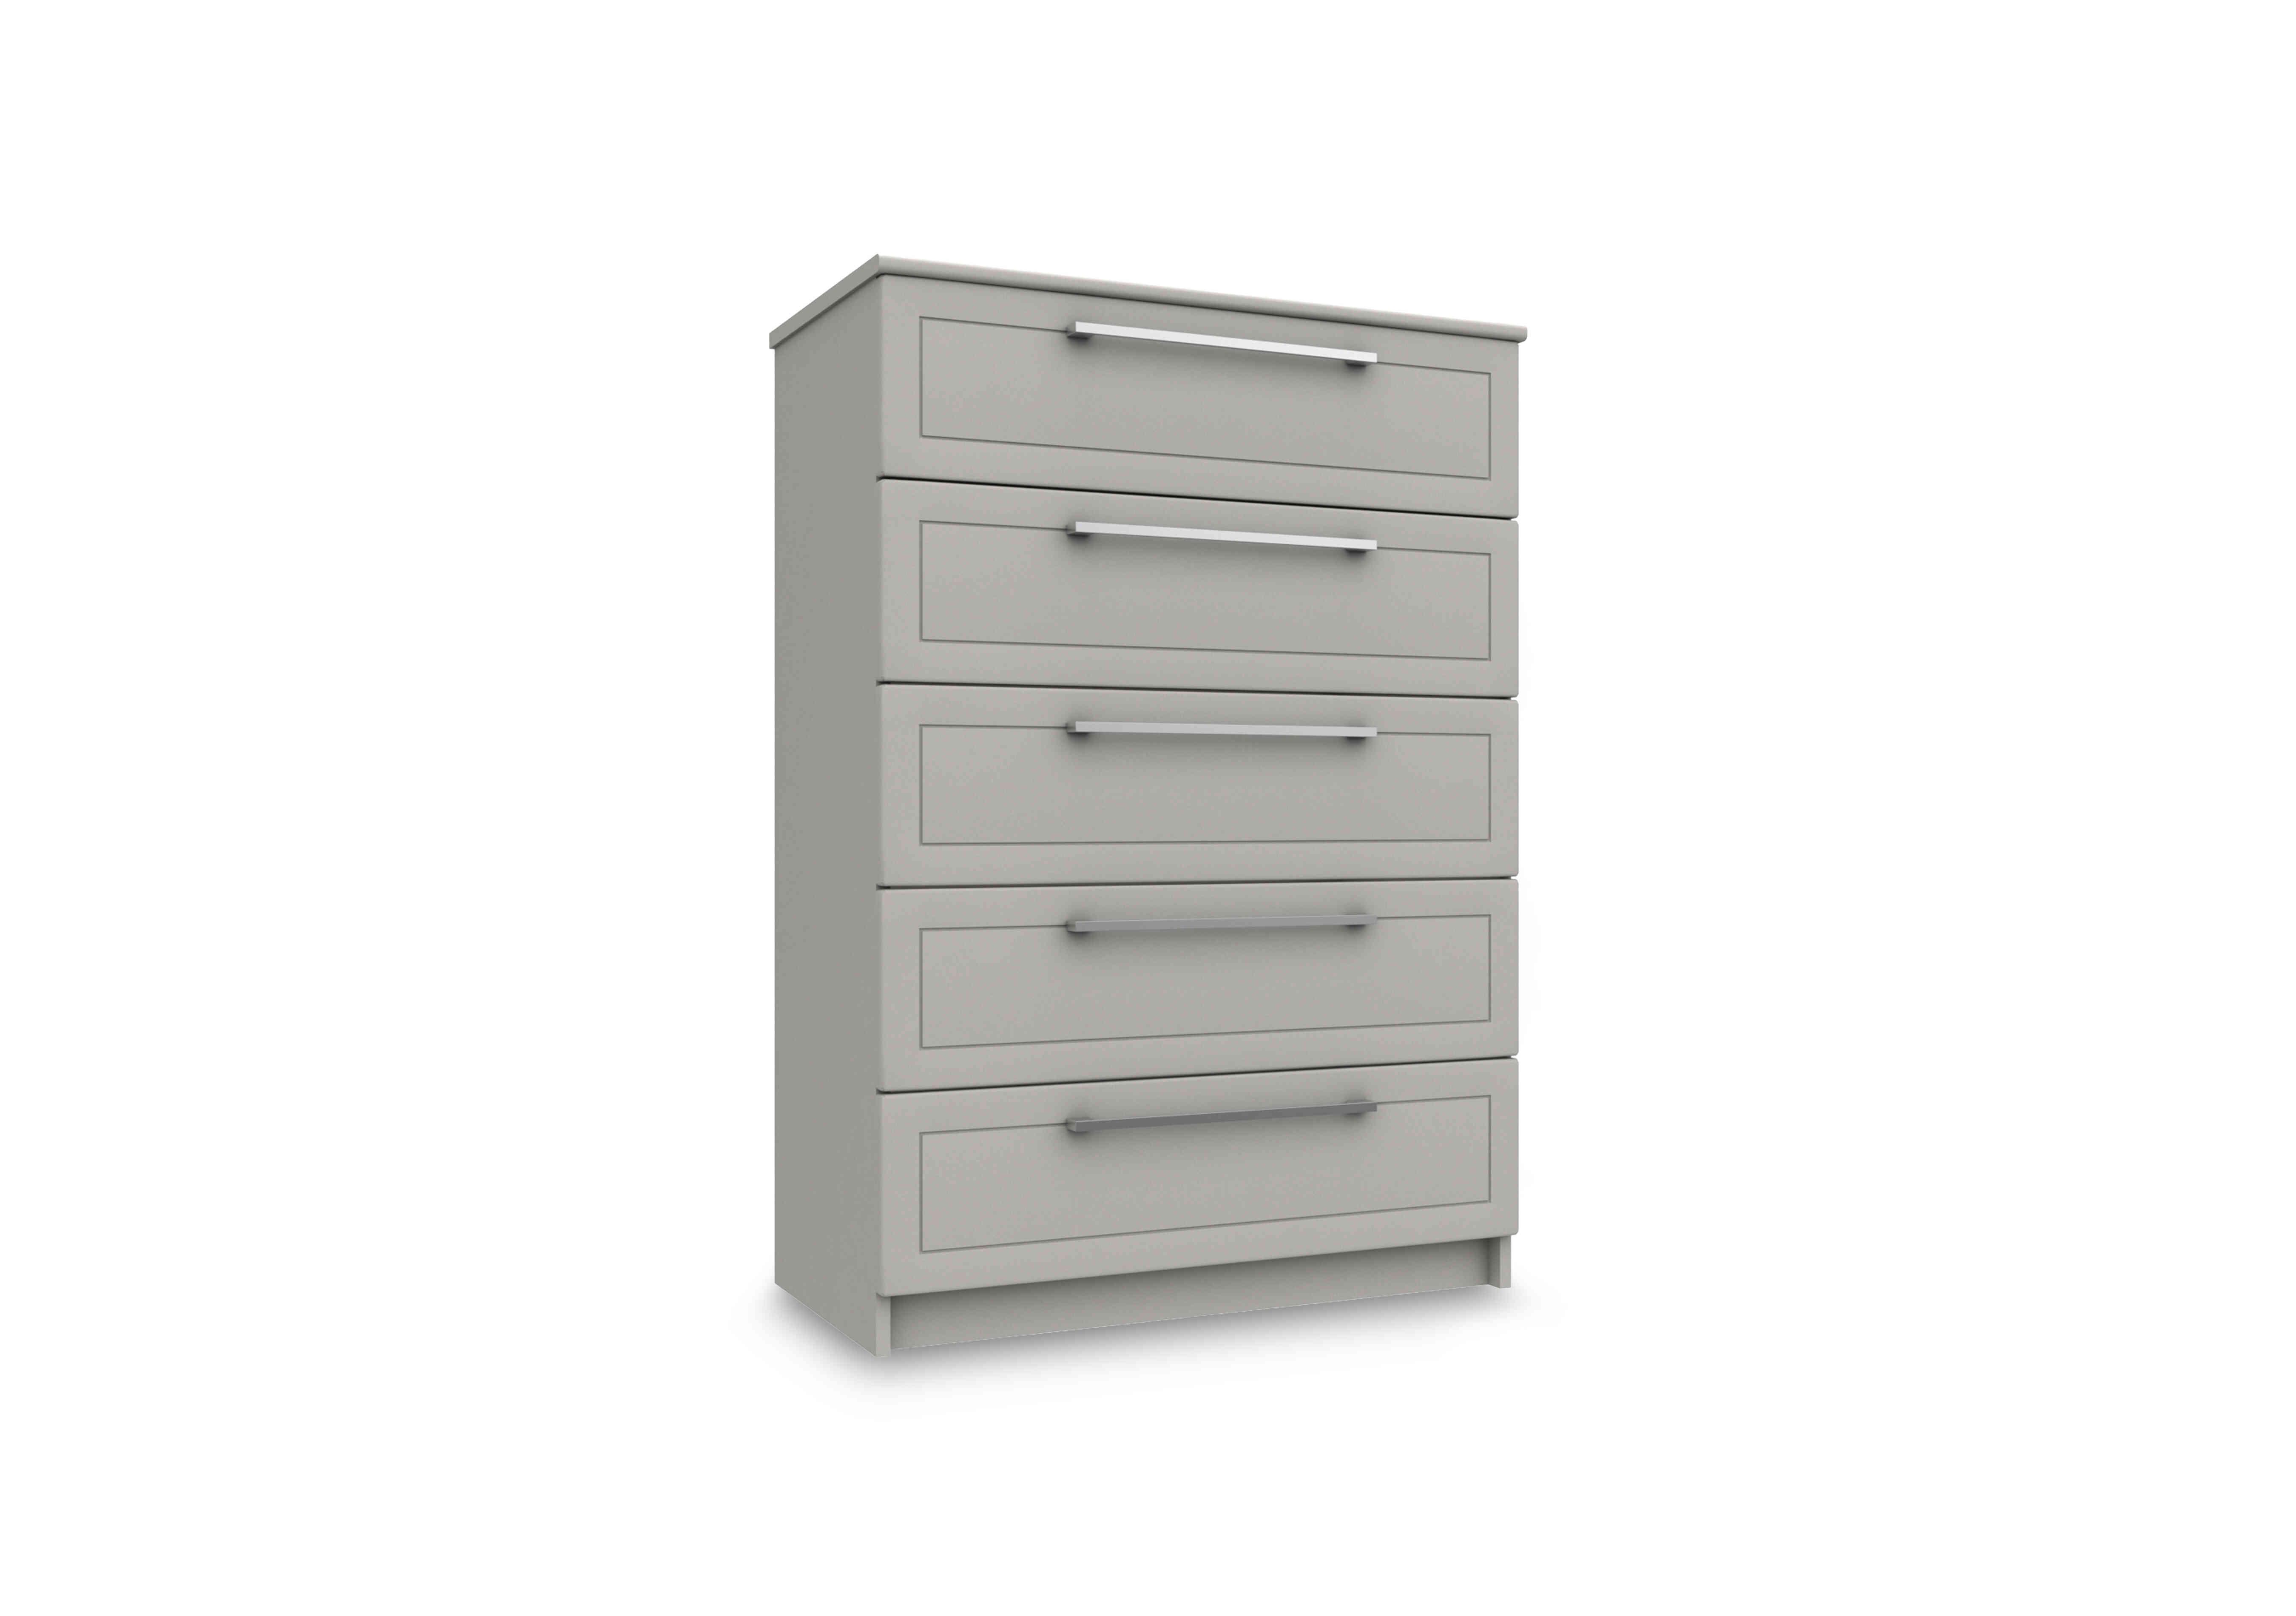 Bexley 5 Drawer Chest in Light Grey Gloss on Furniture Village